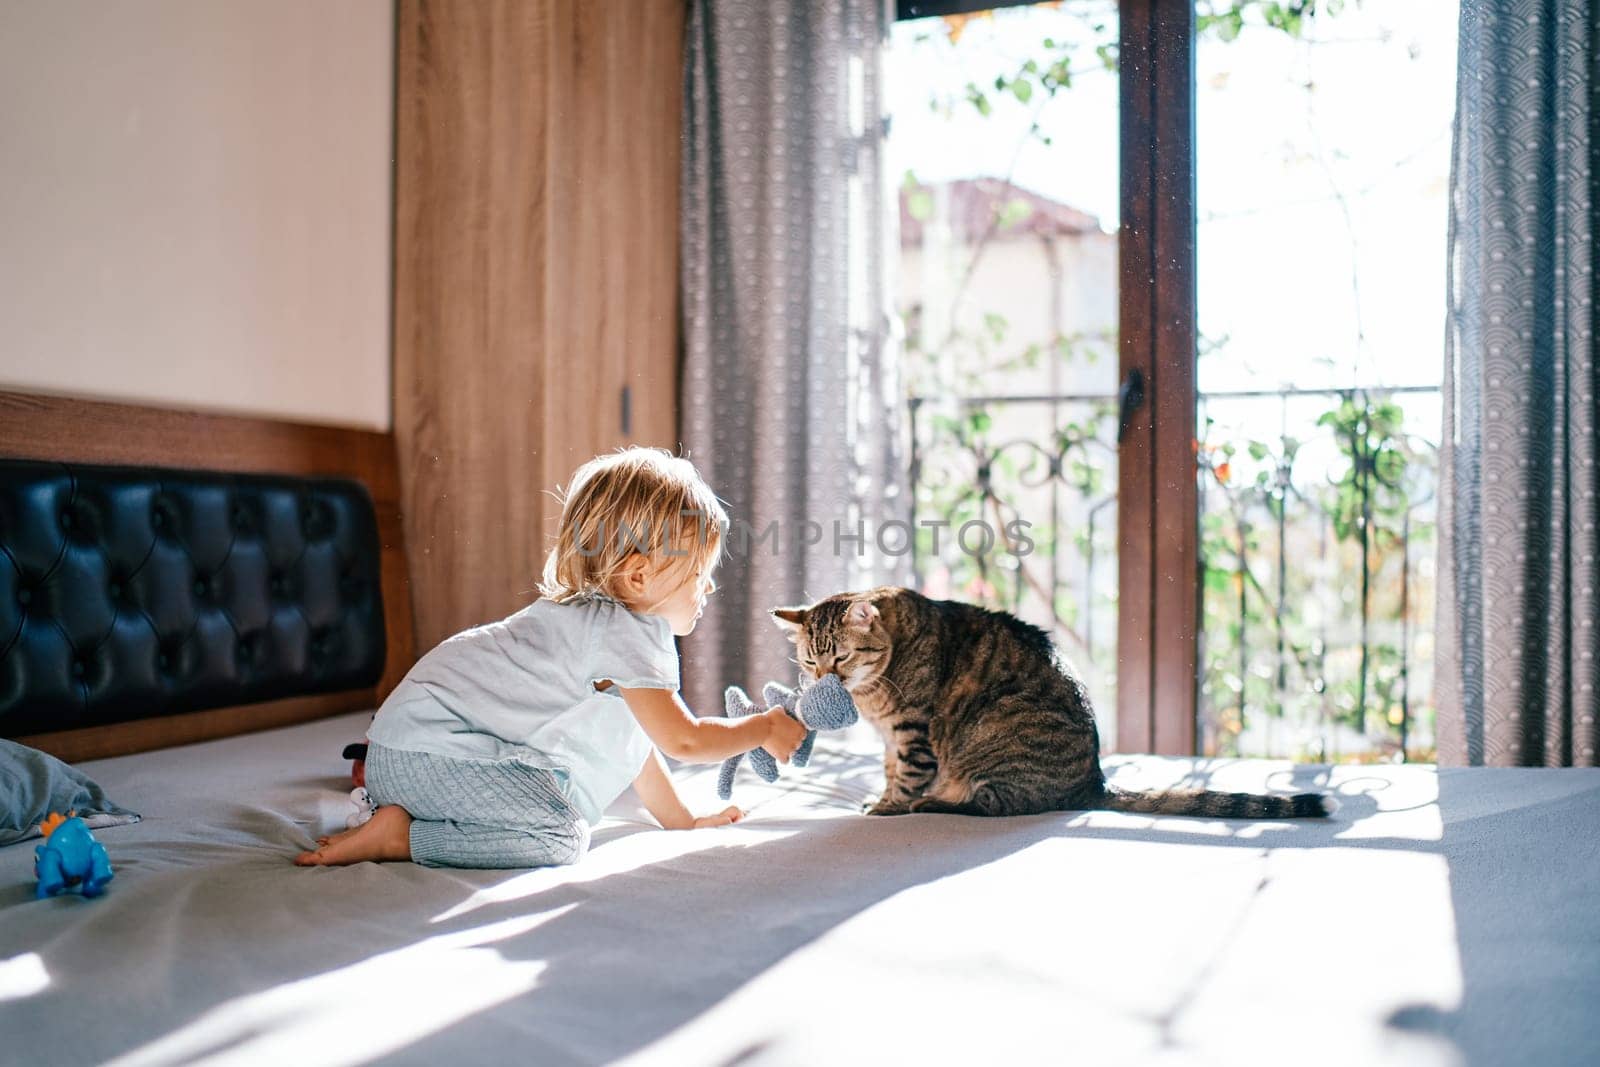 Tabby cat sniffs a soft toy in the hands of a little girl sitting on the bed by Nadtochiy